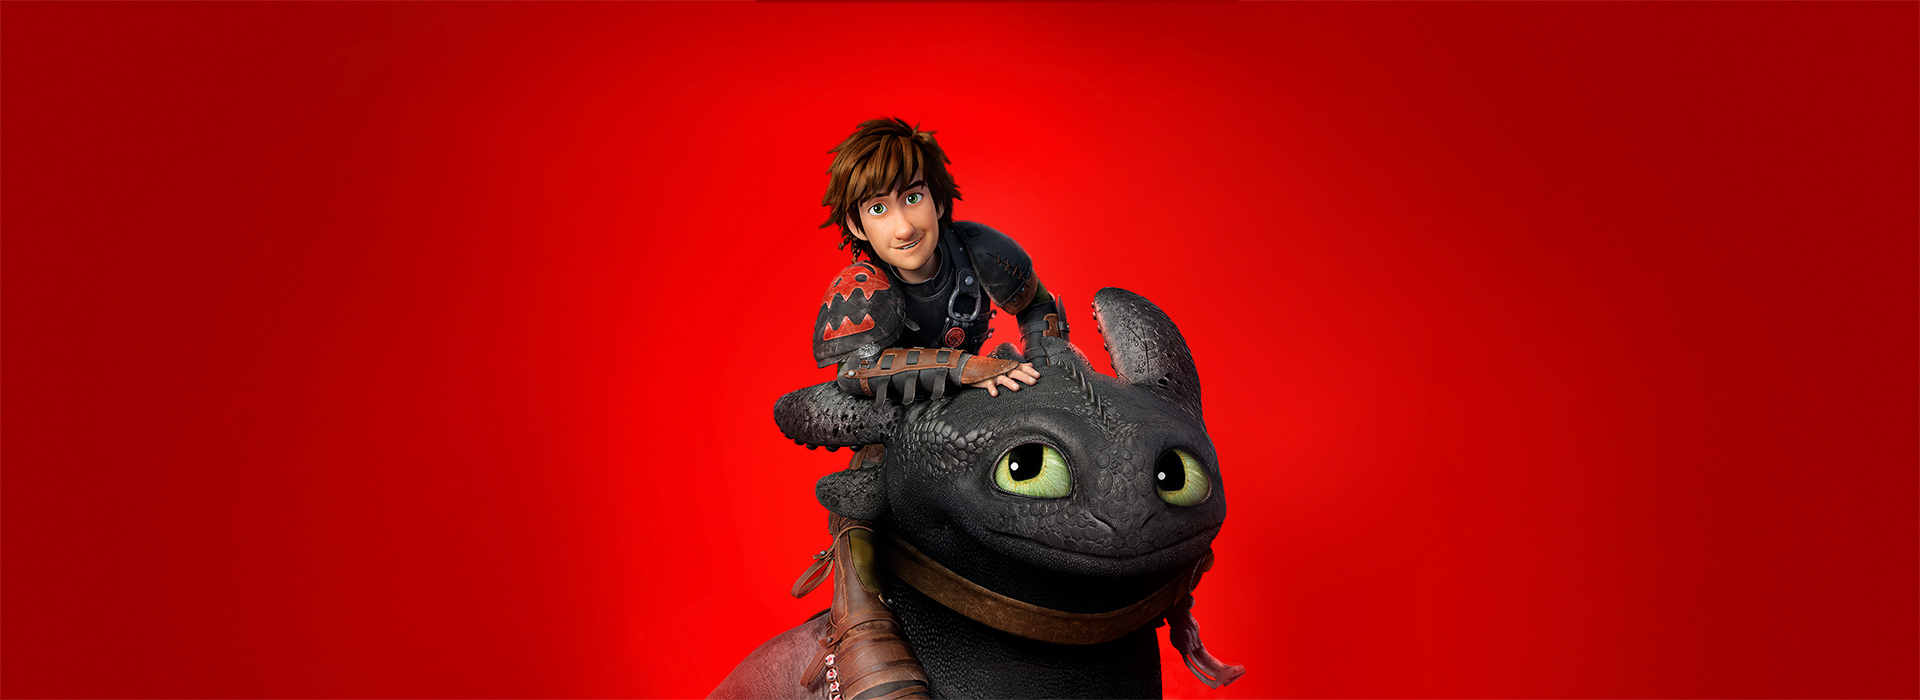 Movie poster How to Train Your Dragon 2